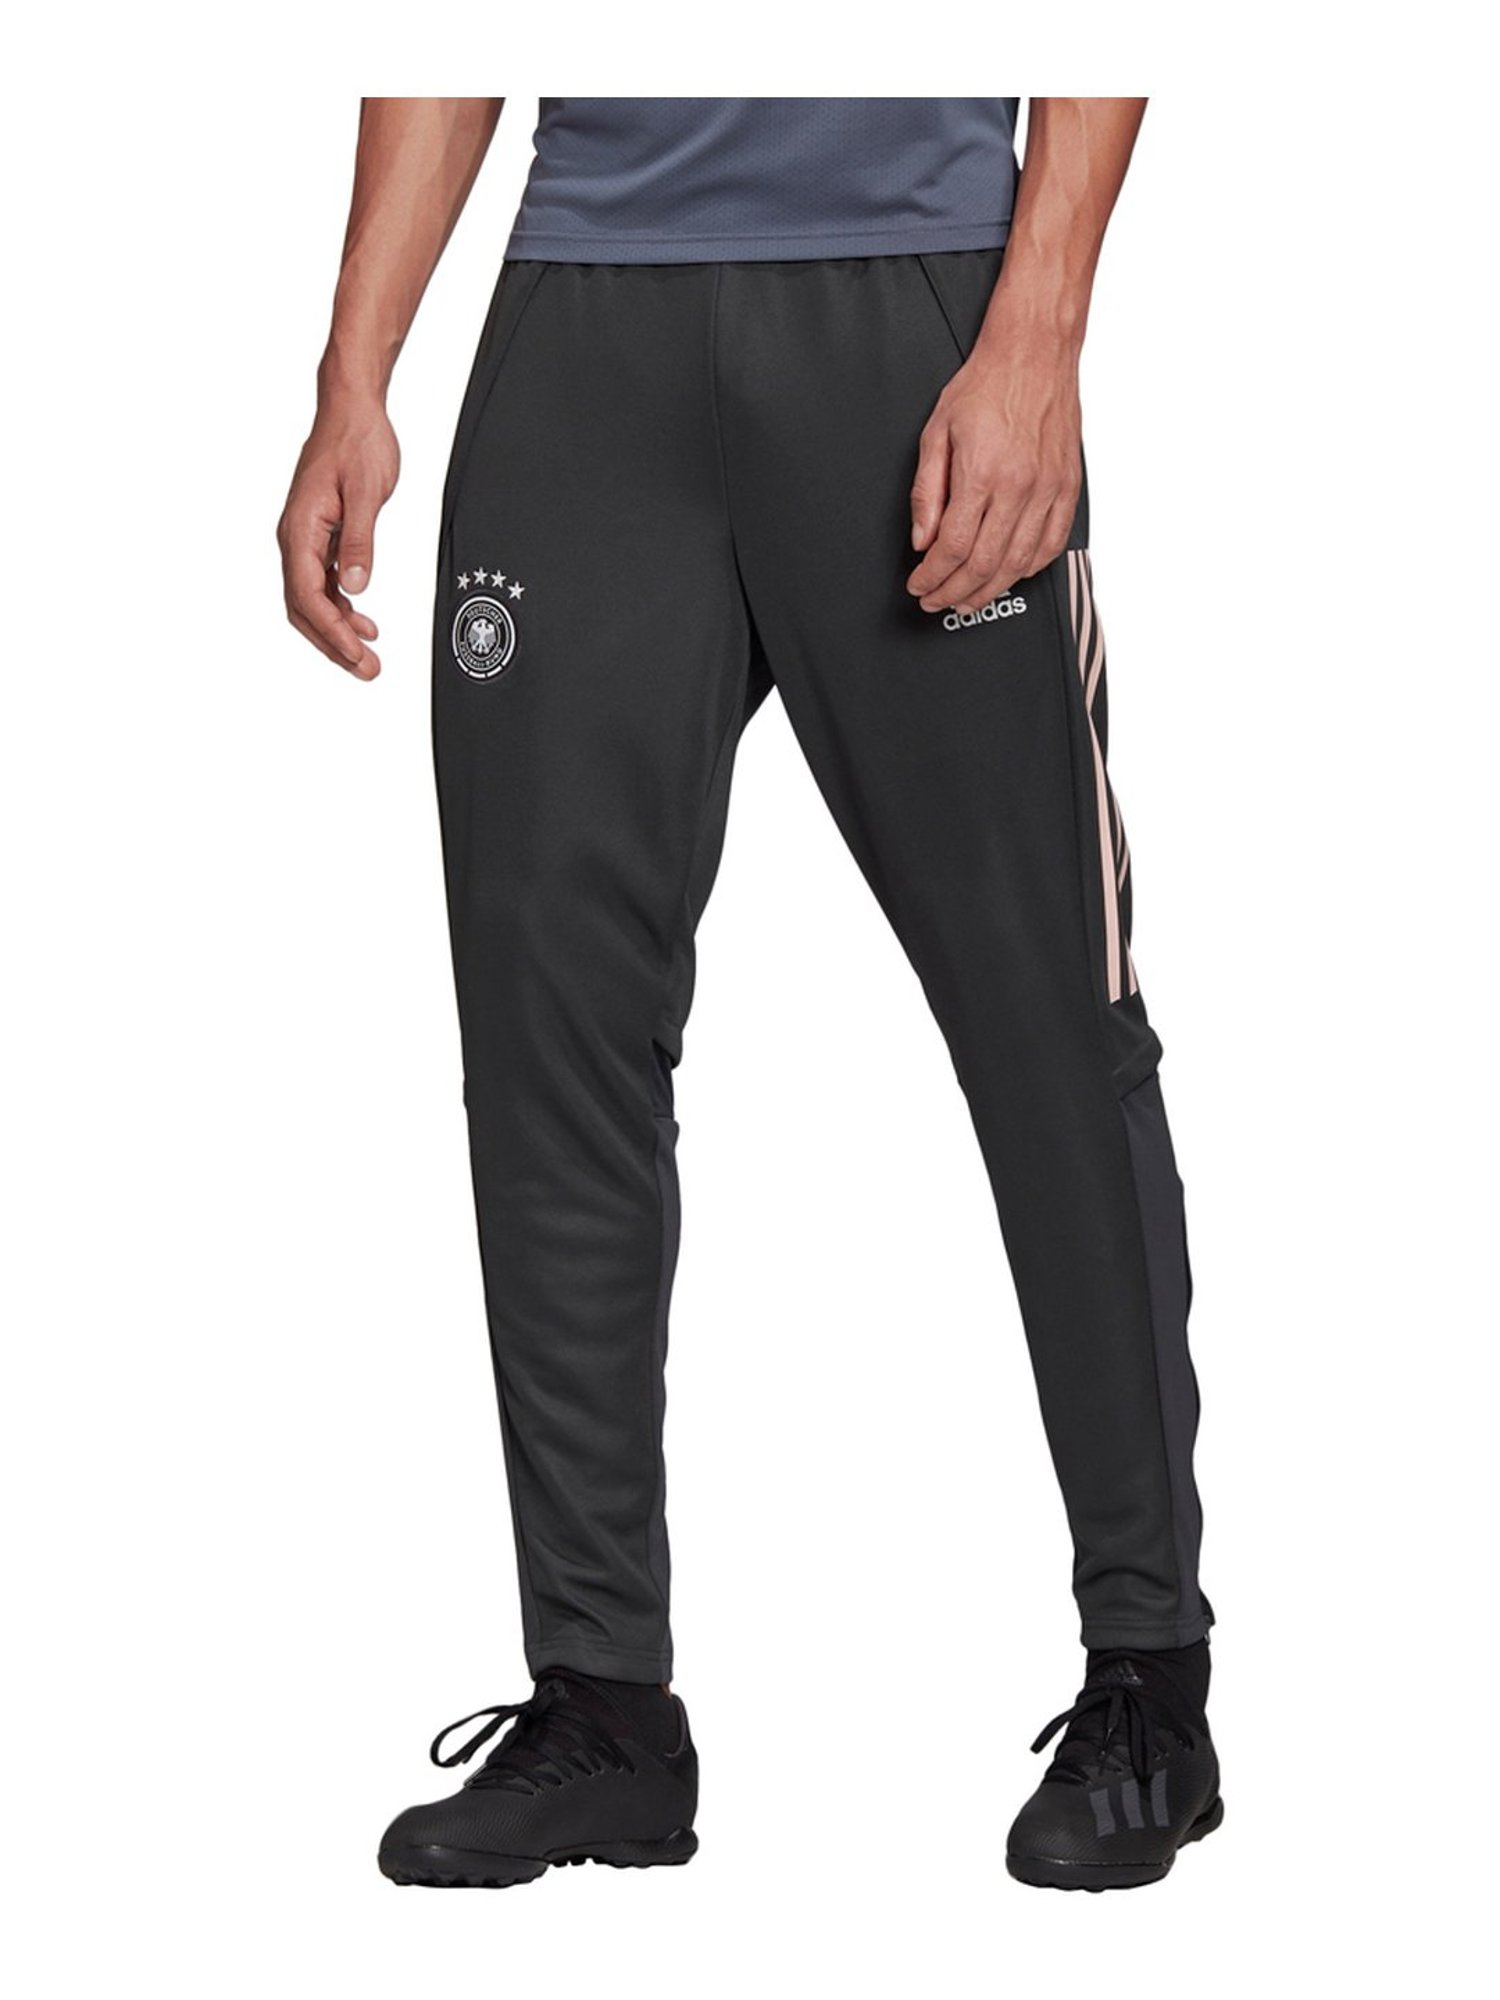 stefanssoccer.com:adidas Youth Real Madrid Training Soccer Pants - White